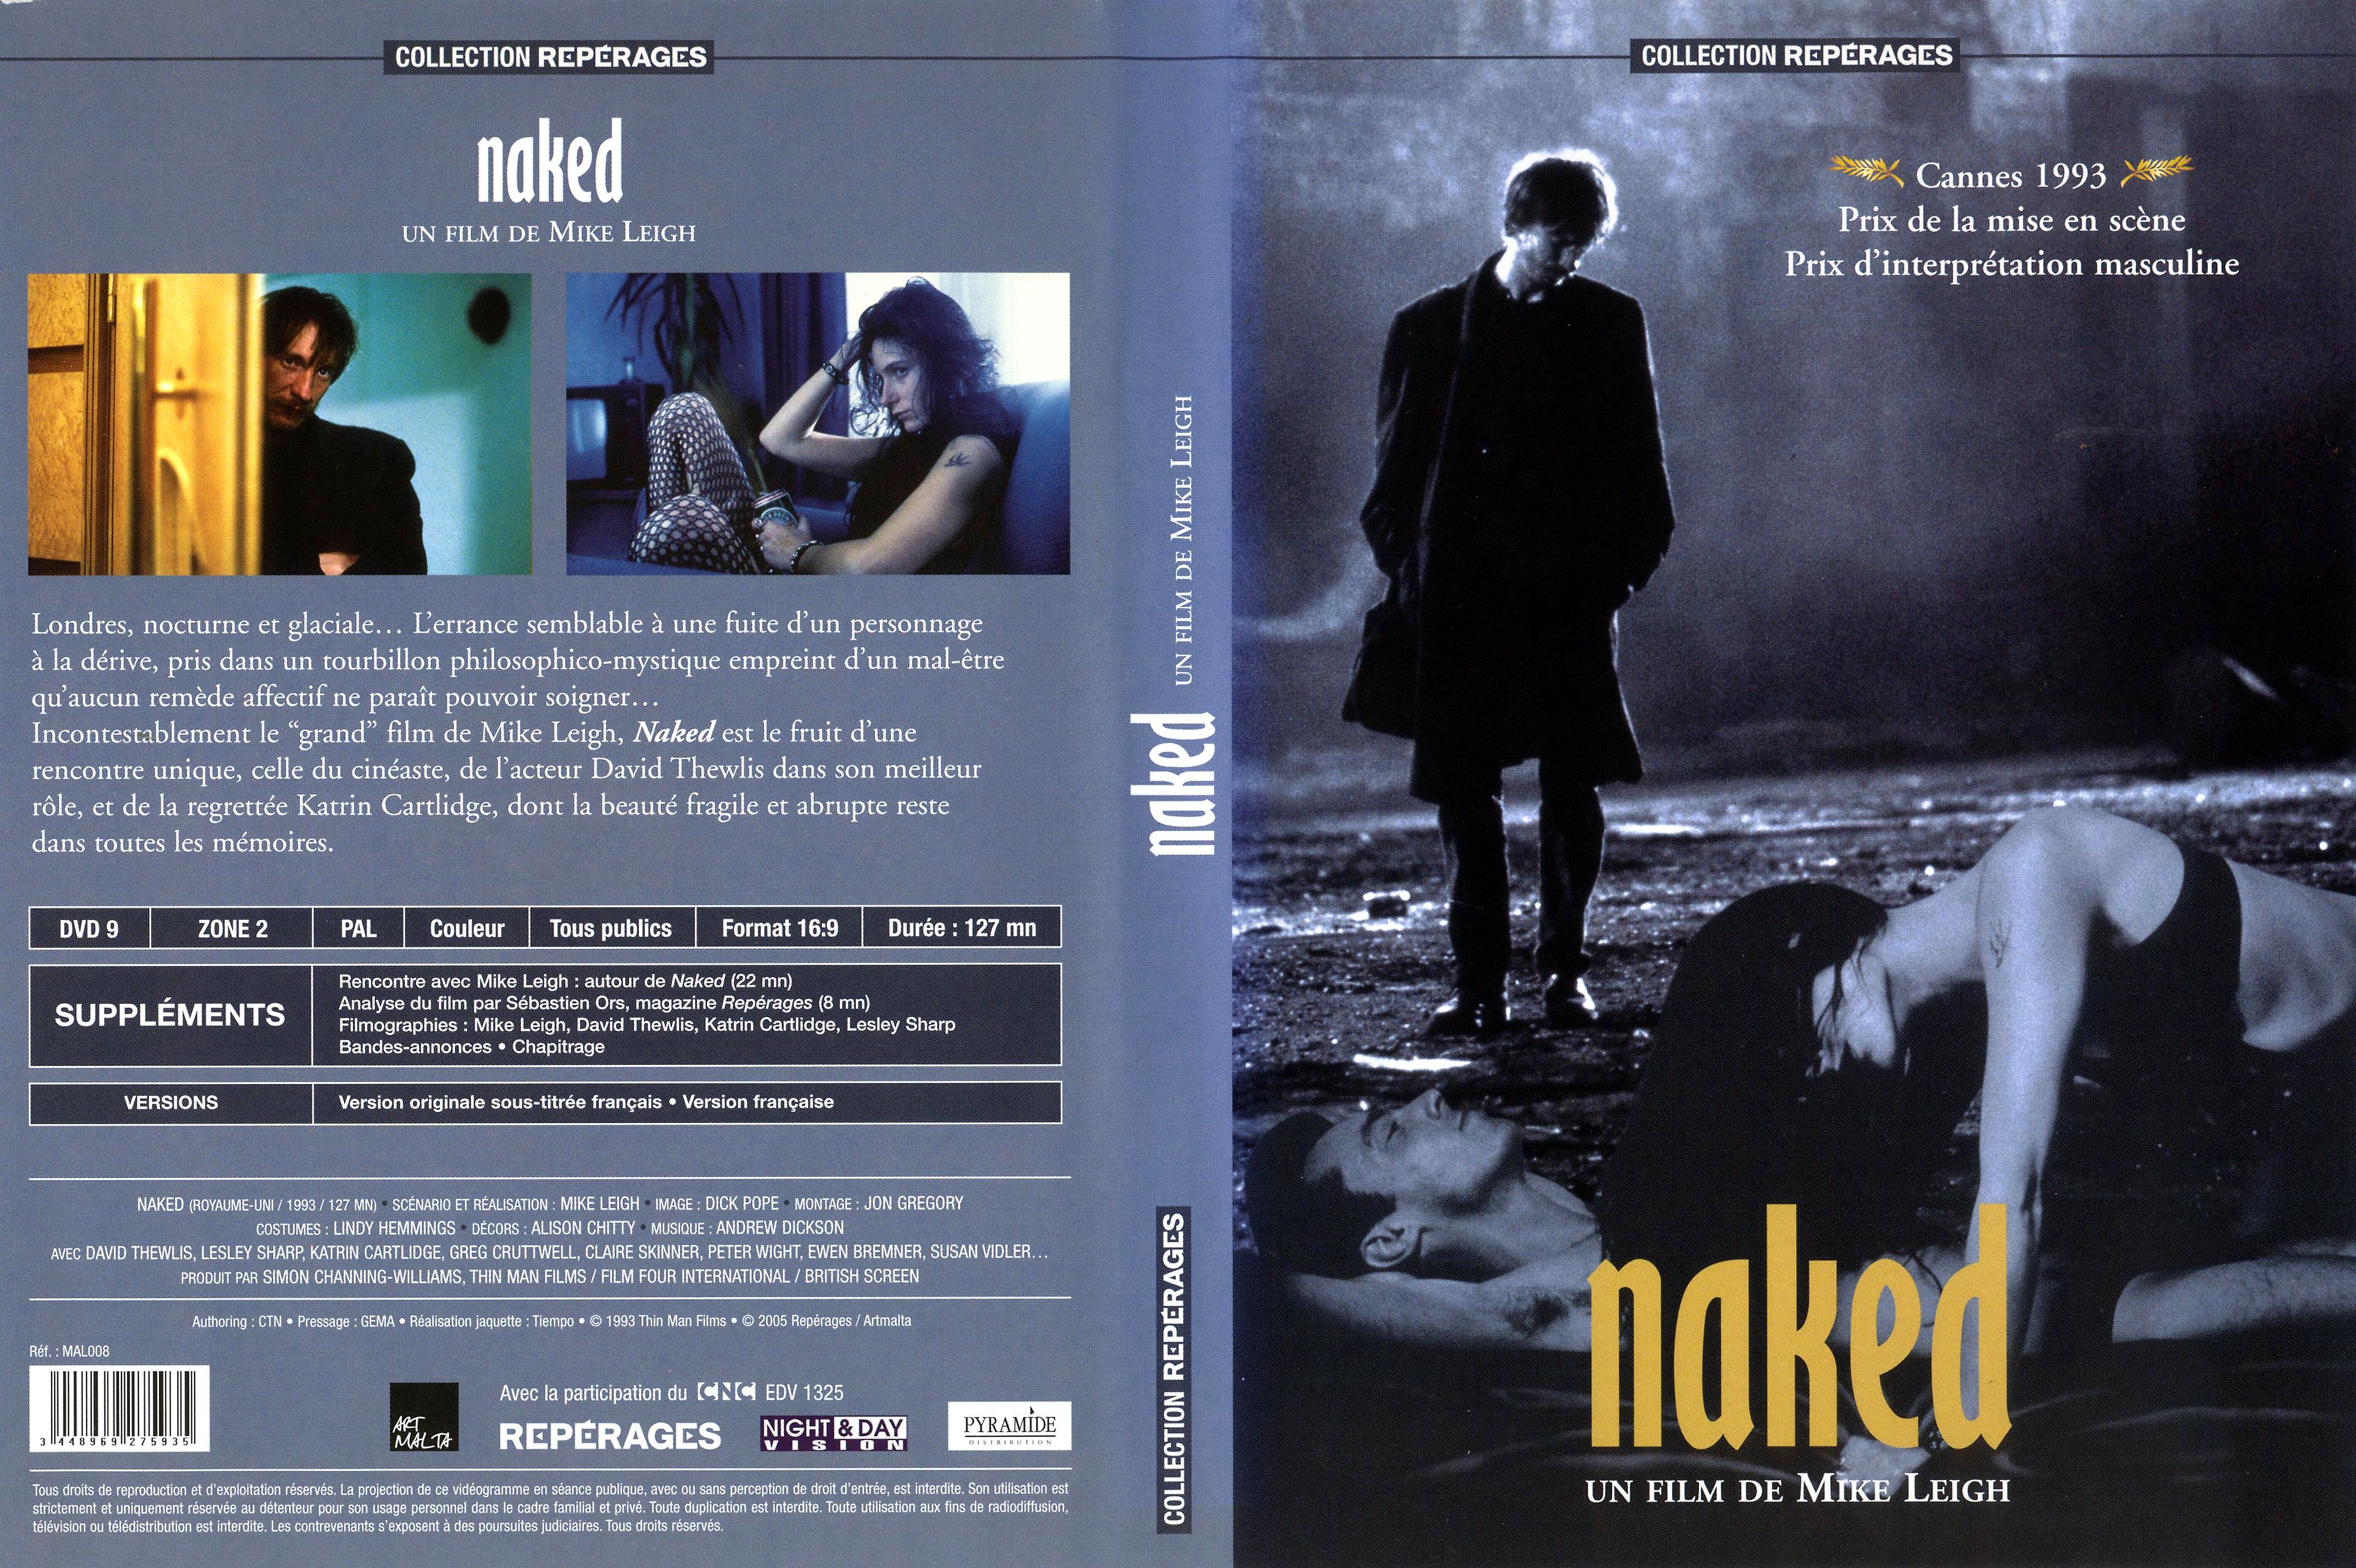 Jaquette DVD Naked